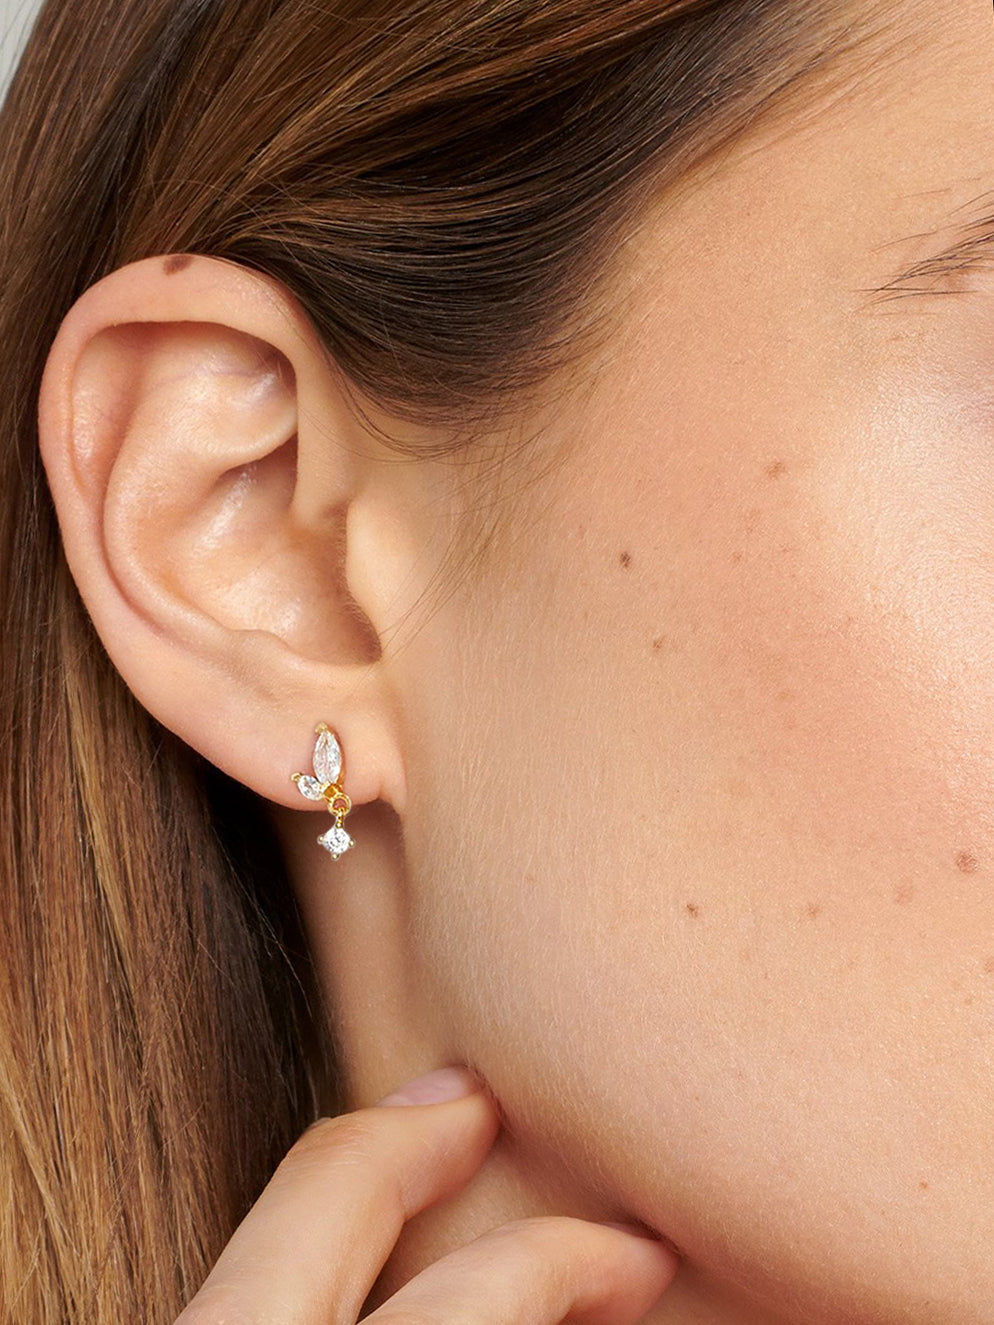 Small marquise stud earrings in gold with a dangling charm.